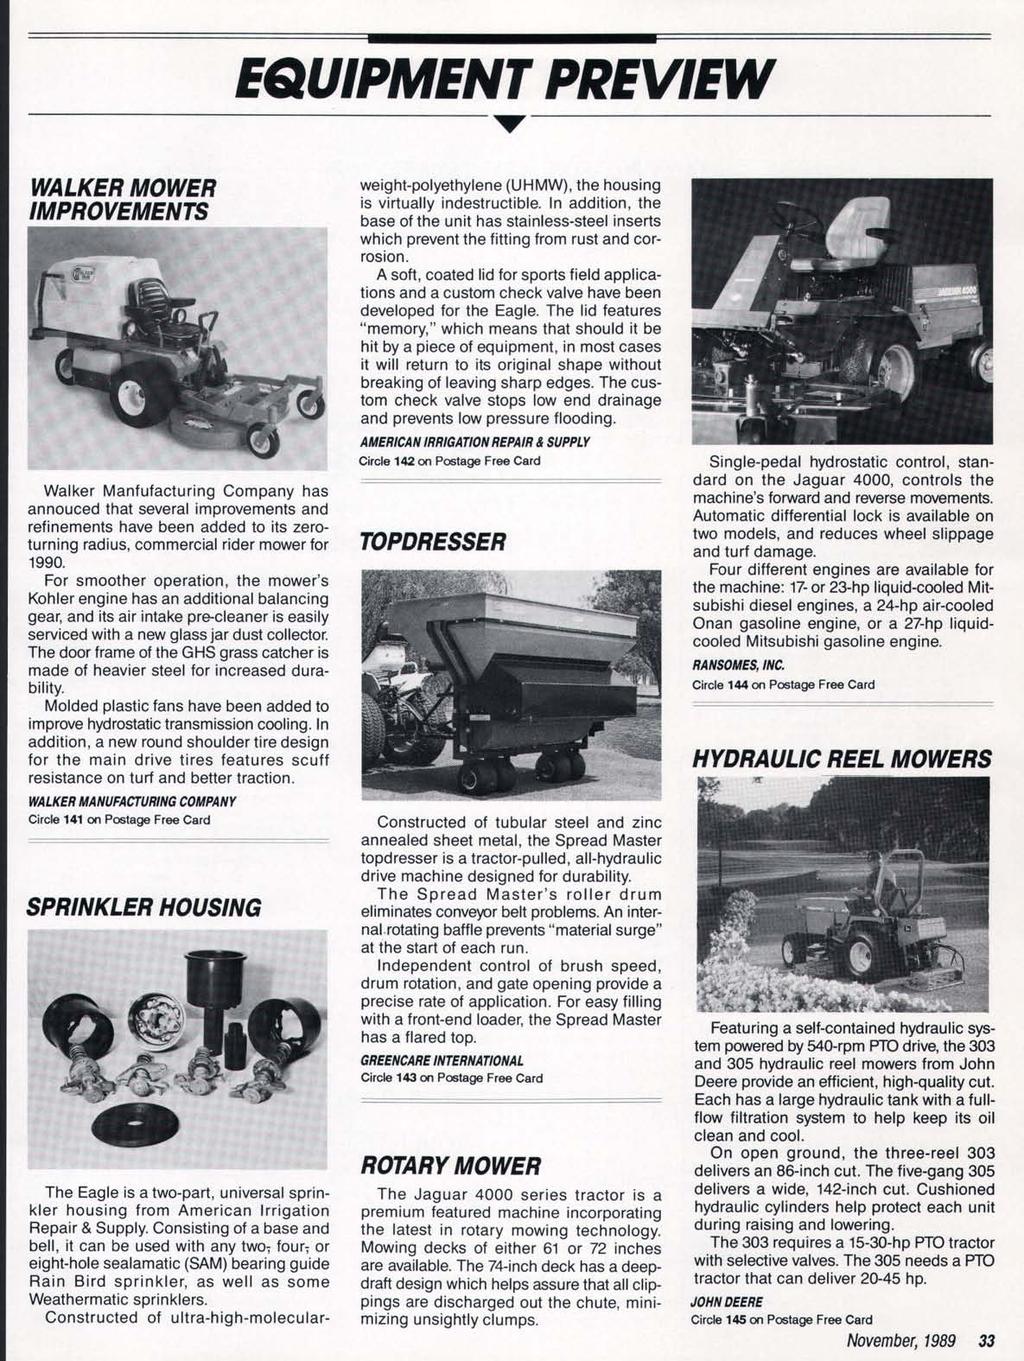 ... WALKER MOWER IMPROVEMENTS Walker Manfufacturing Company has annouced that several improvements and refinements have been added to its zeroturning radius, commercial rider mower for 1990.